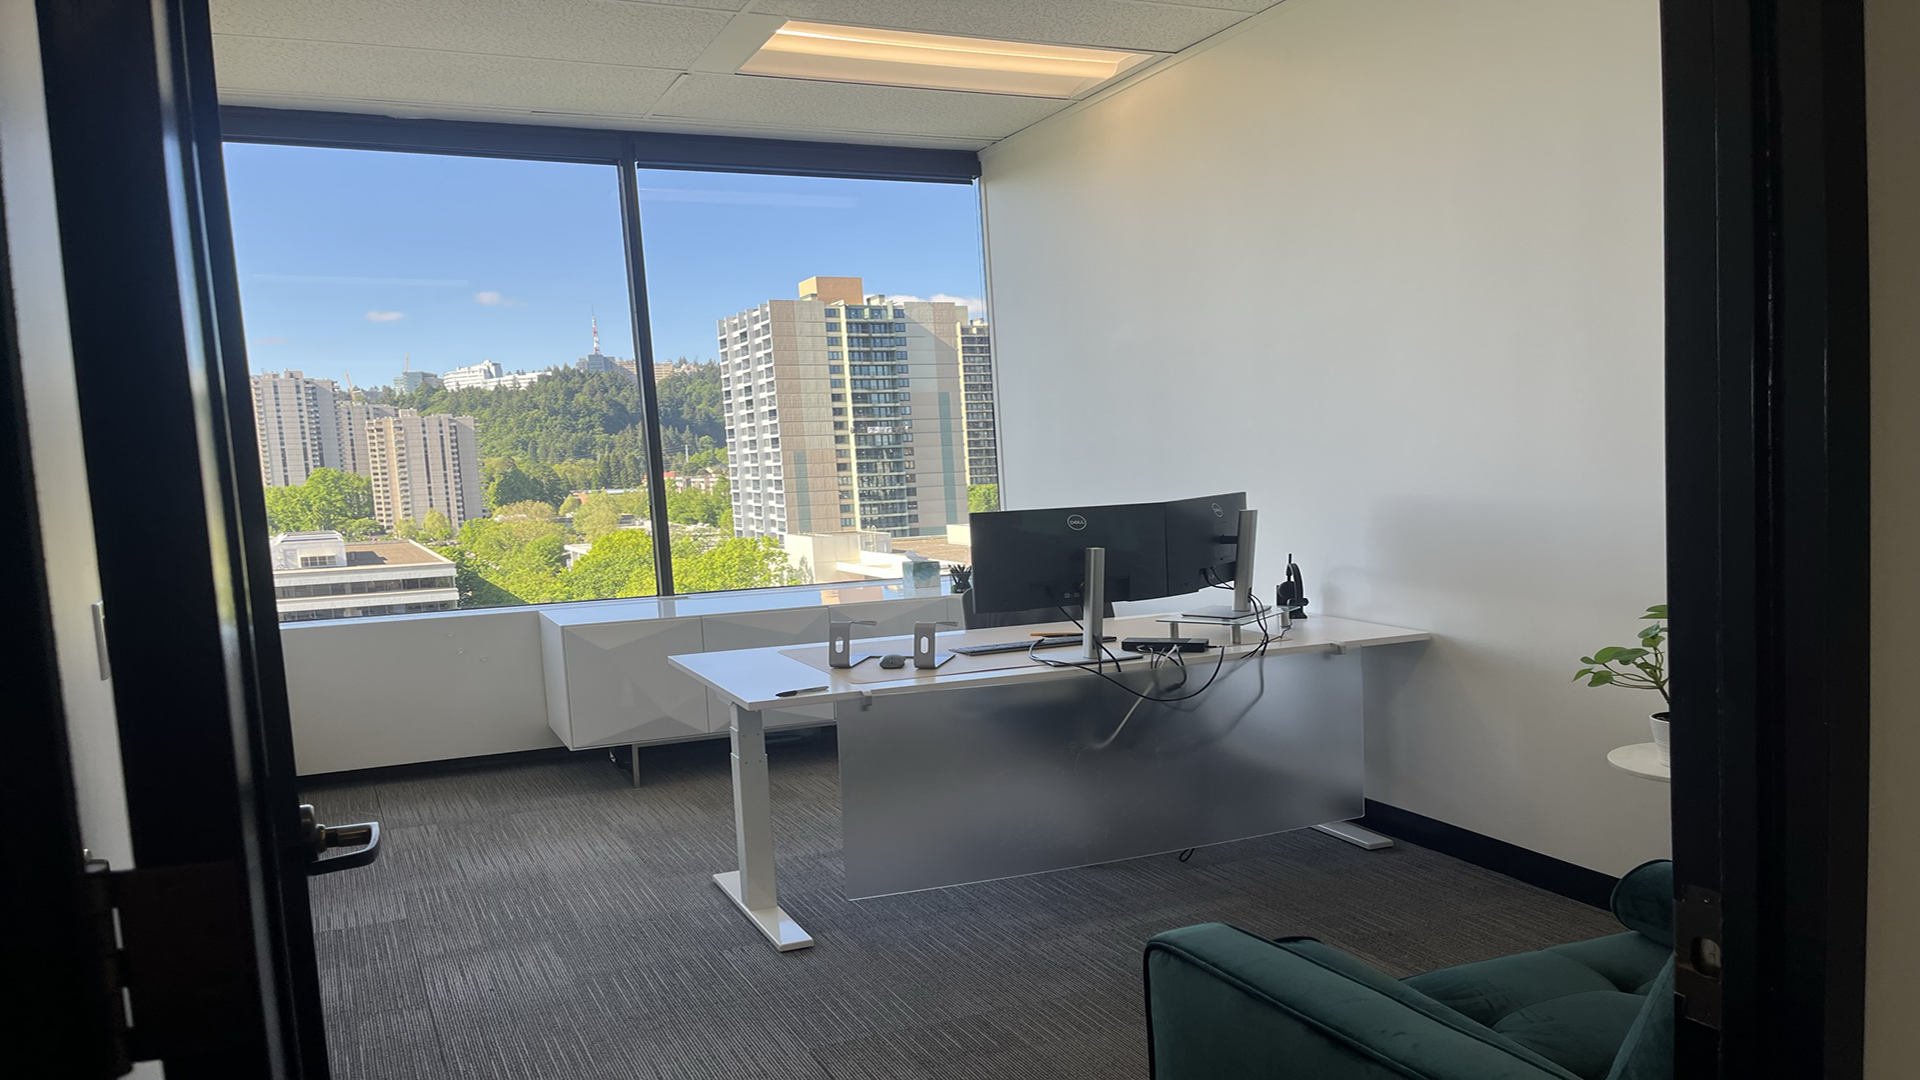 Sublease at 1500 SW 1st Ave, Portland, OR